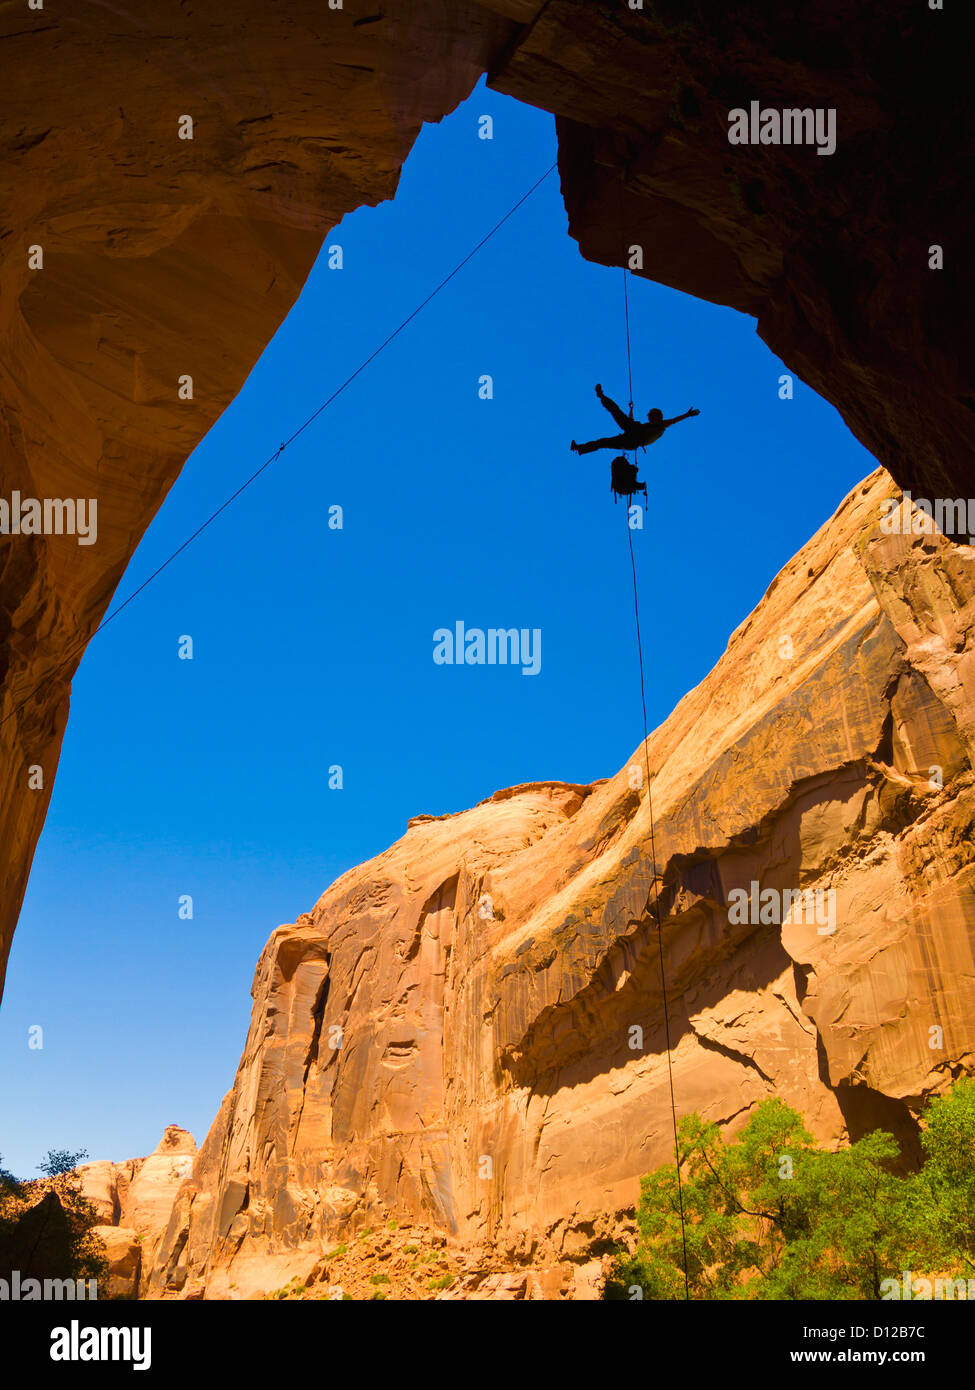 A Female Athlete Rappeling Down A Dry Utah Slot Canyon Waterfall; Hanksville Utah United States Of America Stock Photo